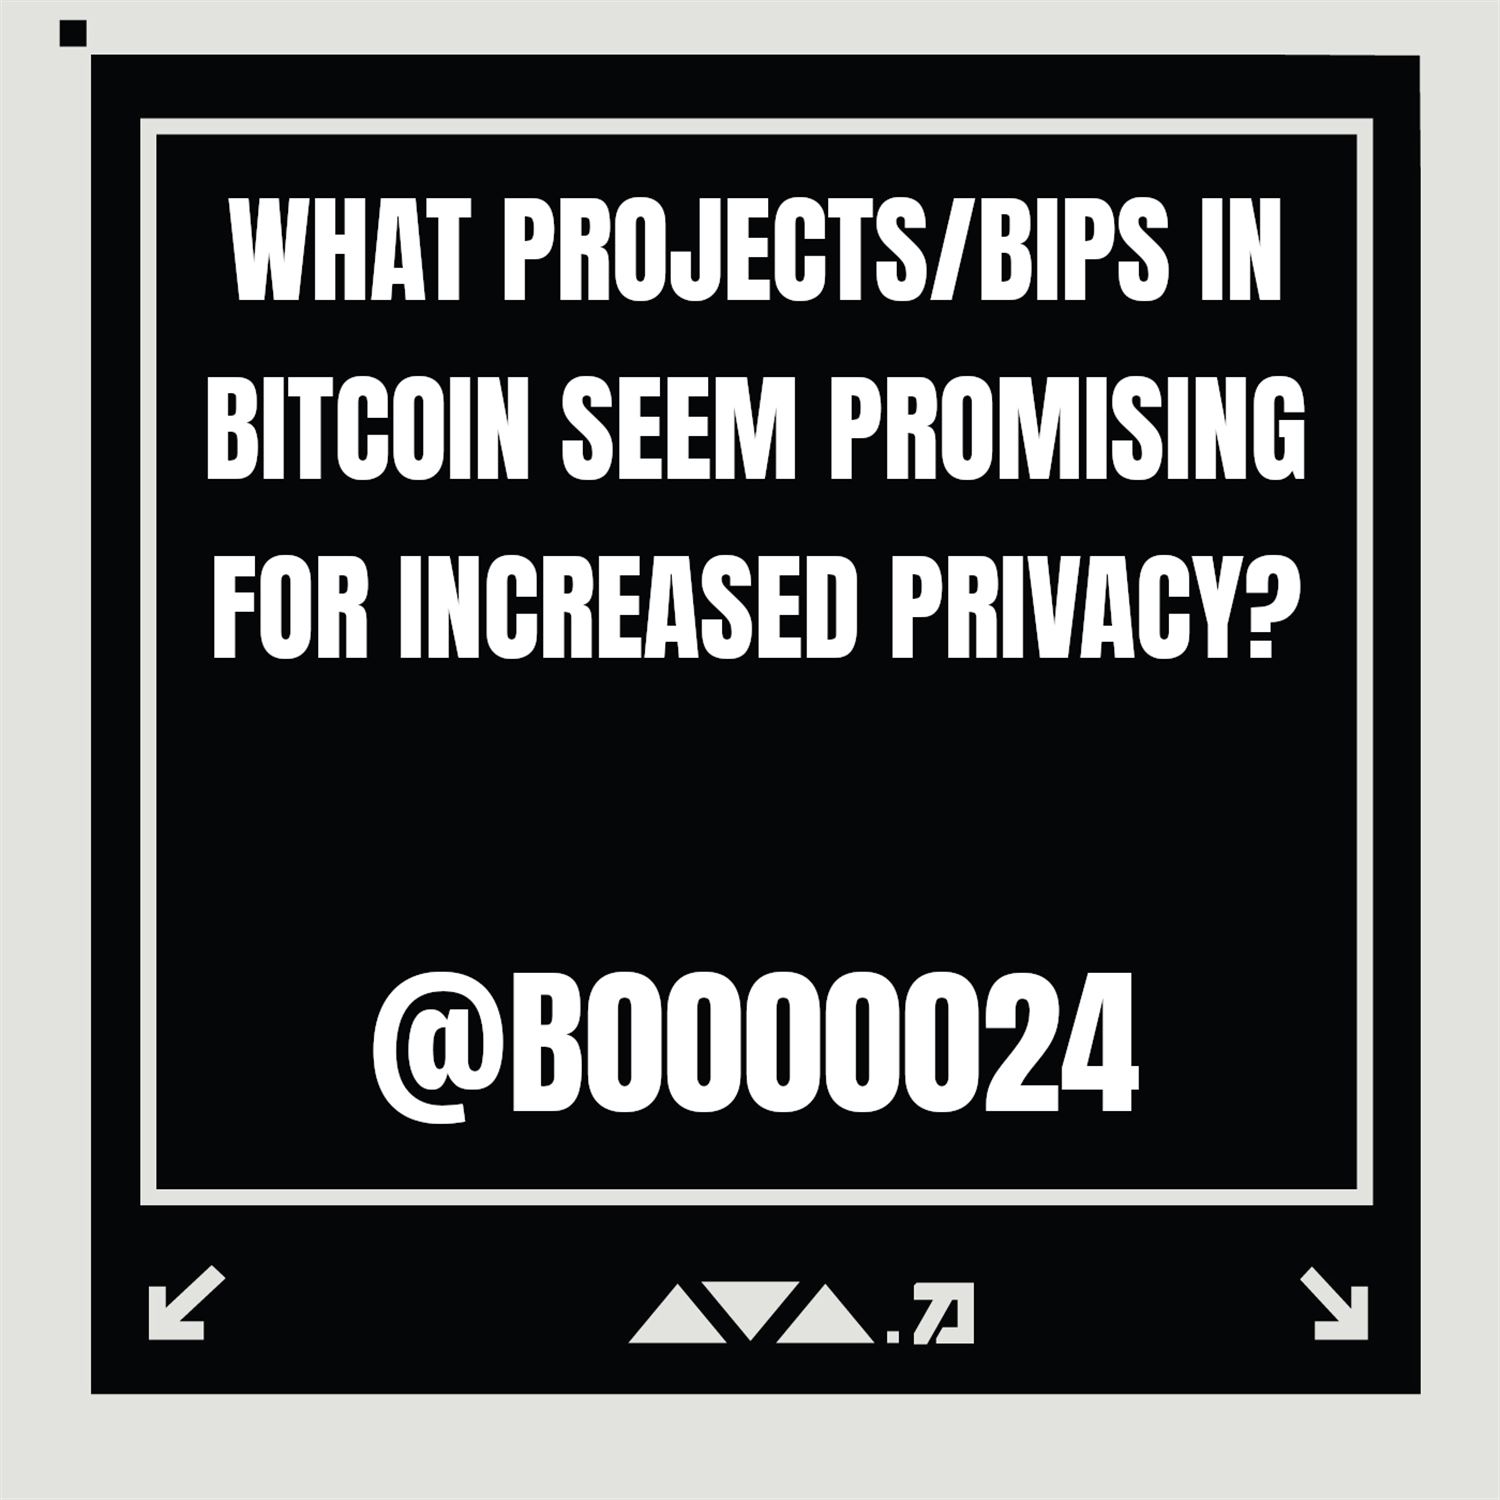 Q13: Promising Privacy Based Projects/BIPs